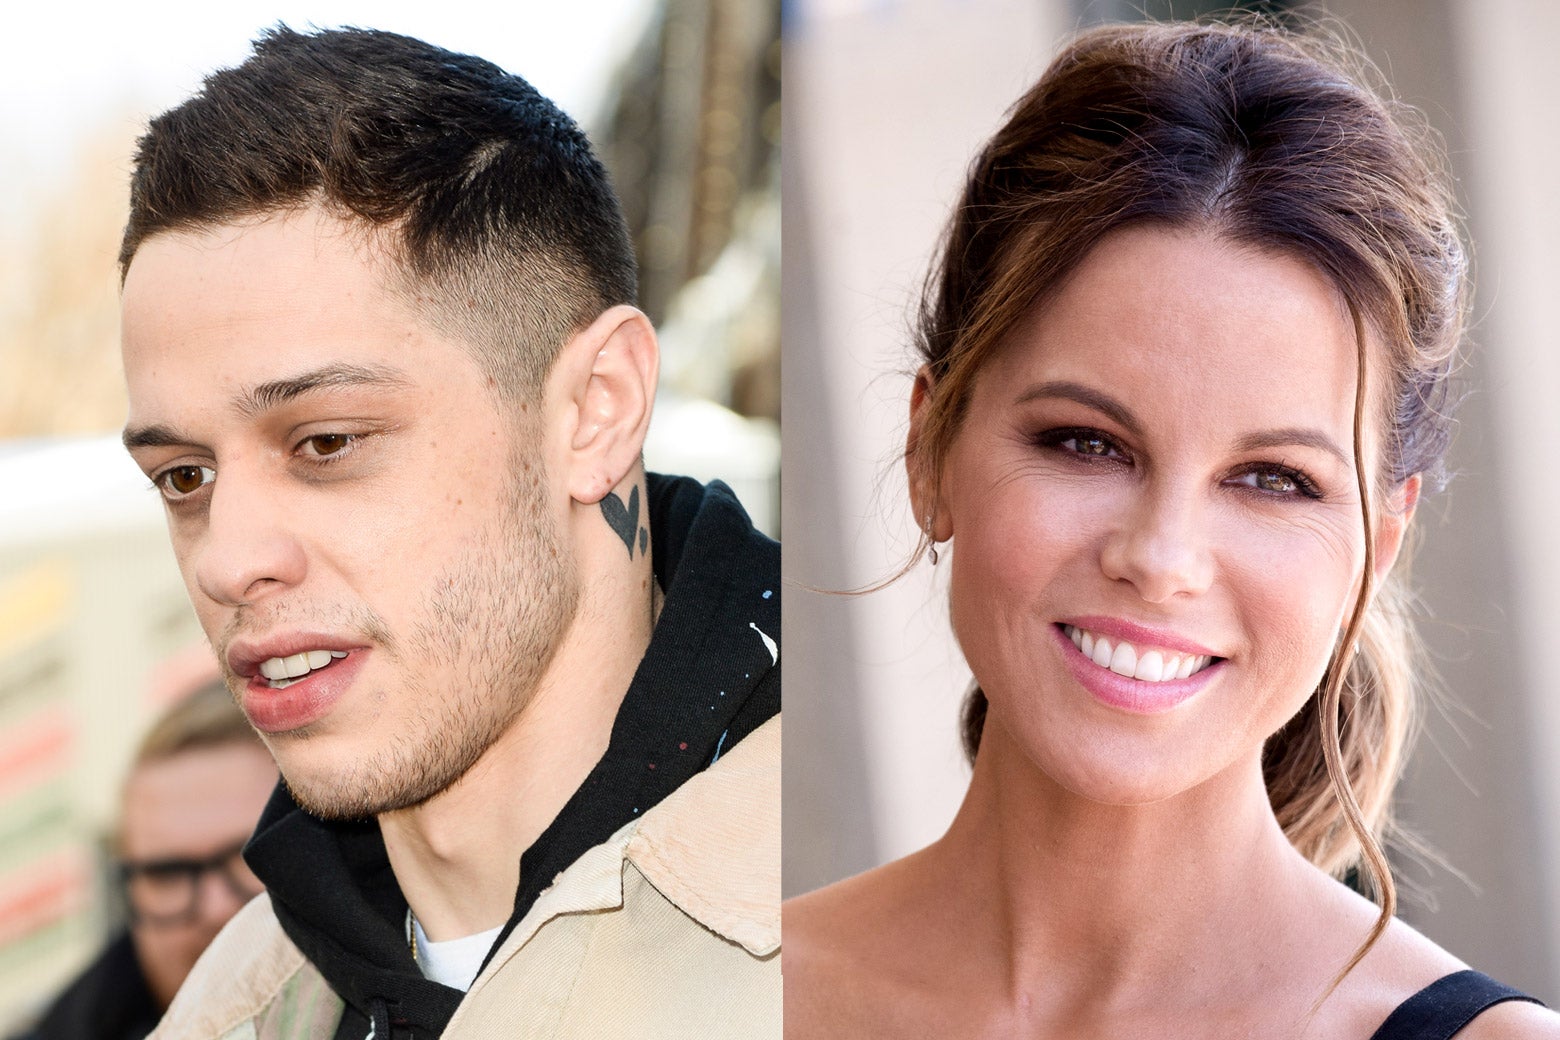 vores madras daytime Pete Davidson discussed his relationship and age gap with Kate Beckinsale  on Saturday Night Live, but the reaction hasn't been sexist.